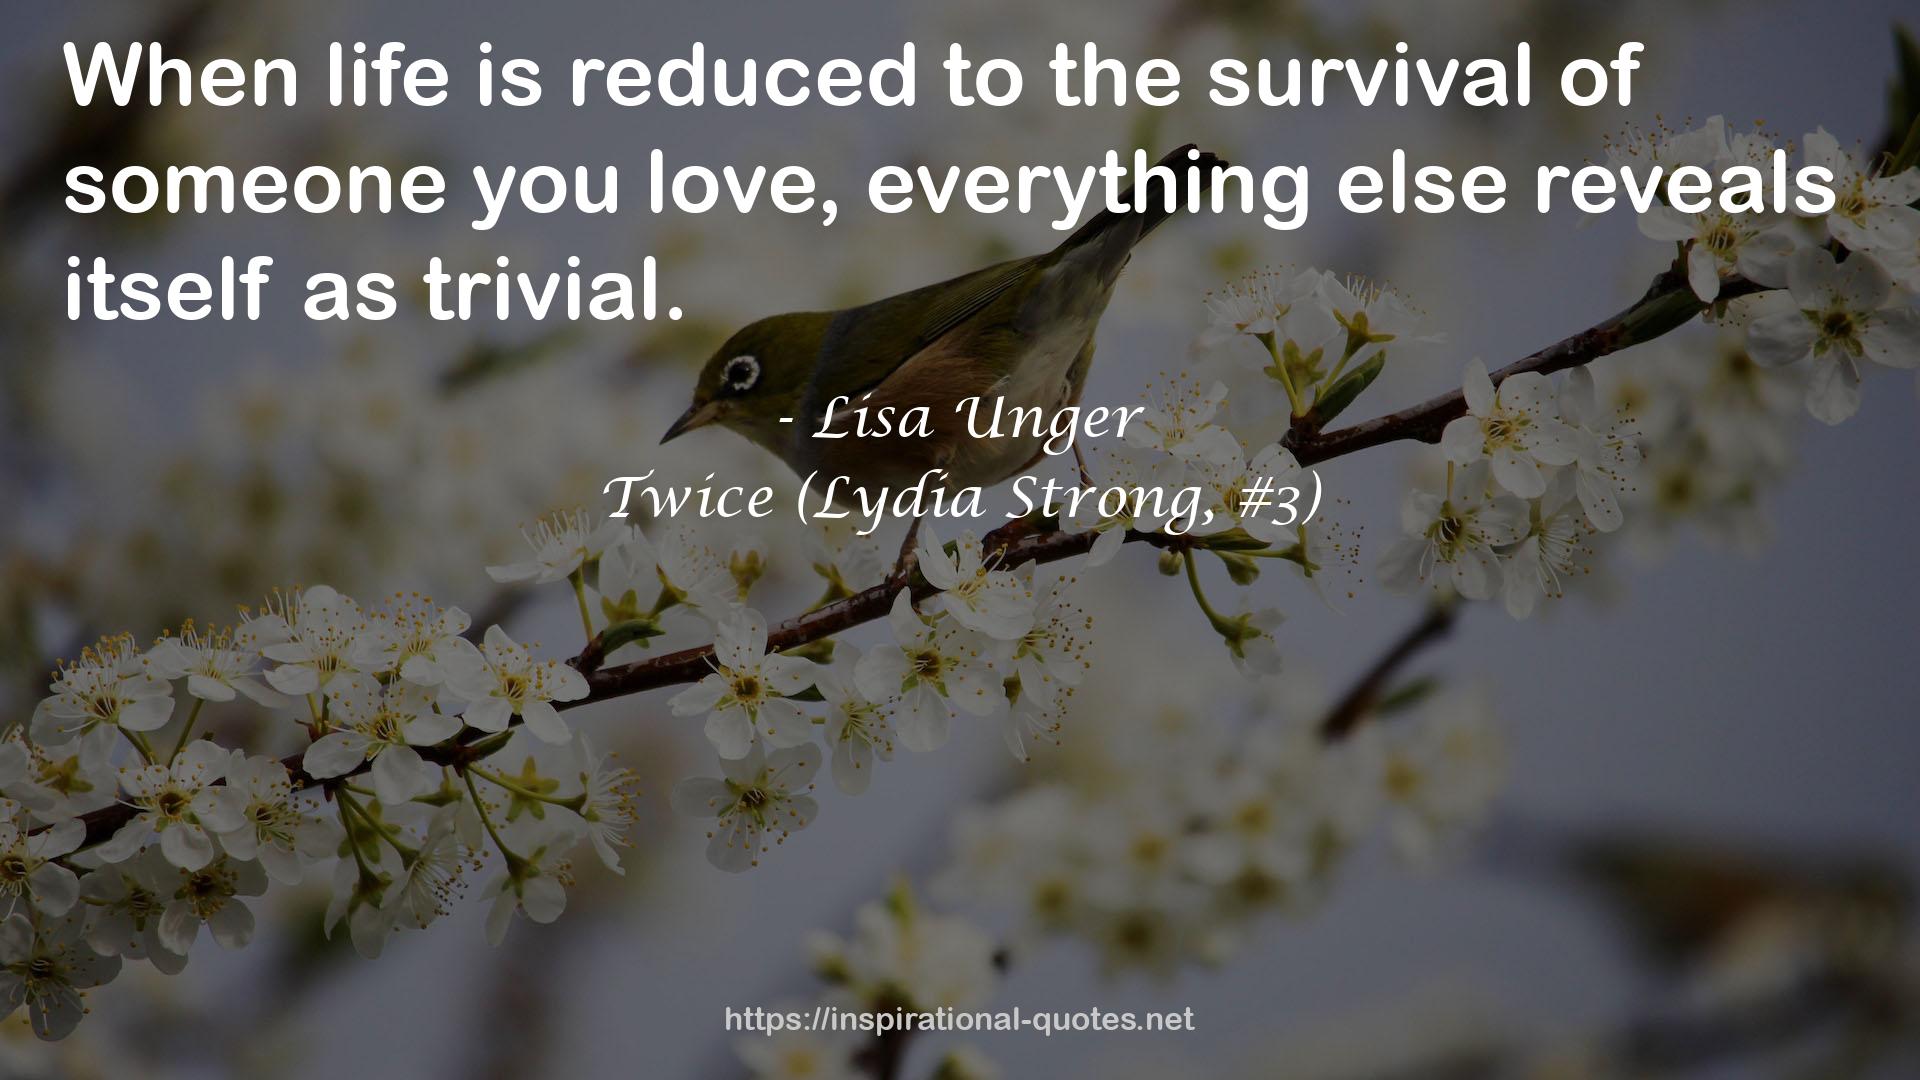 Twice (Lydia Strong, #3) QUOTES